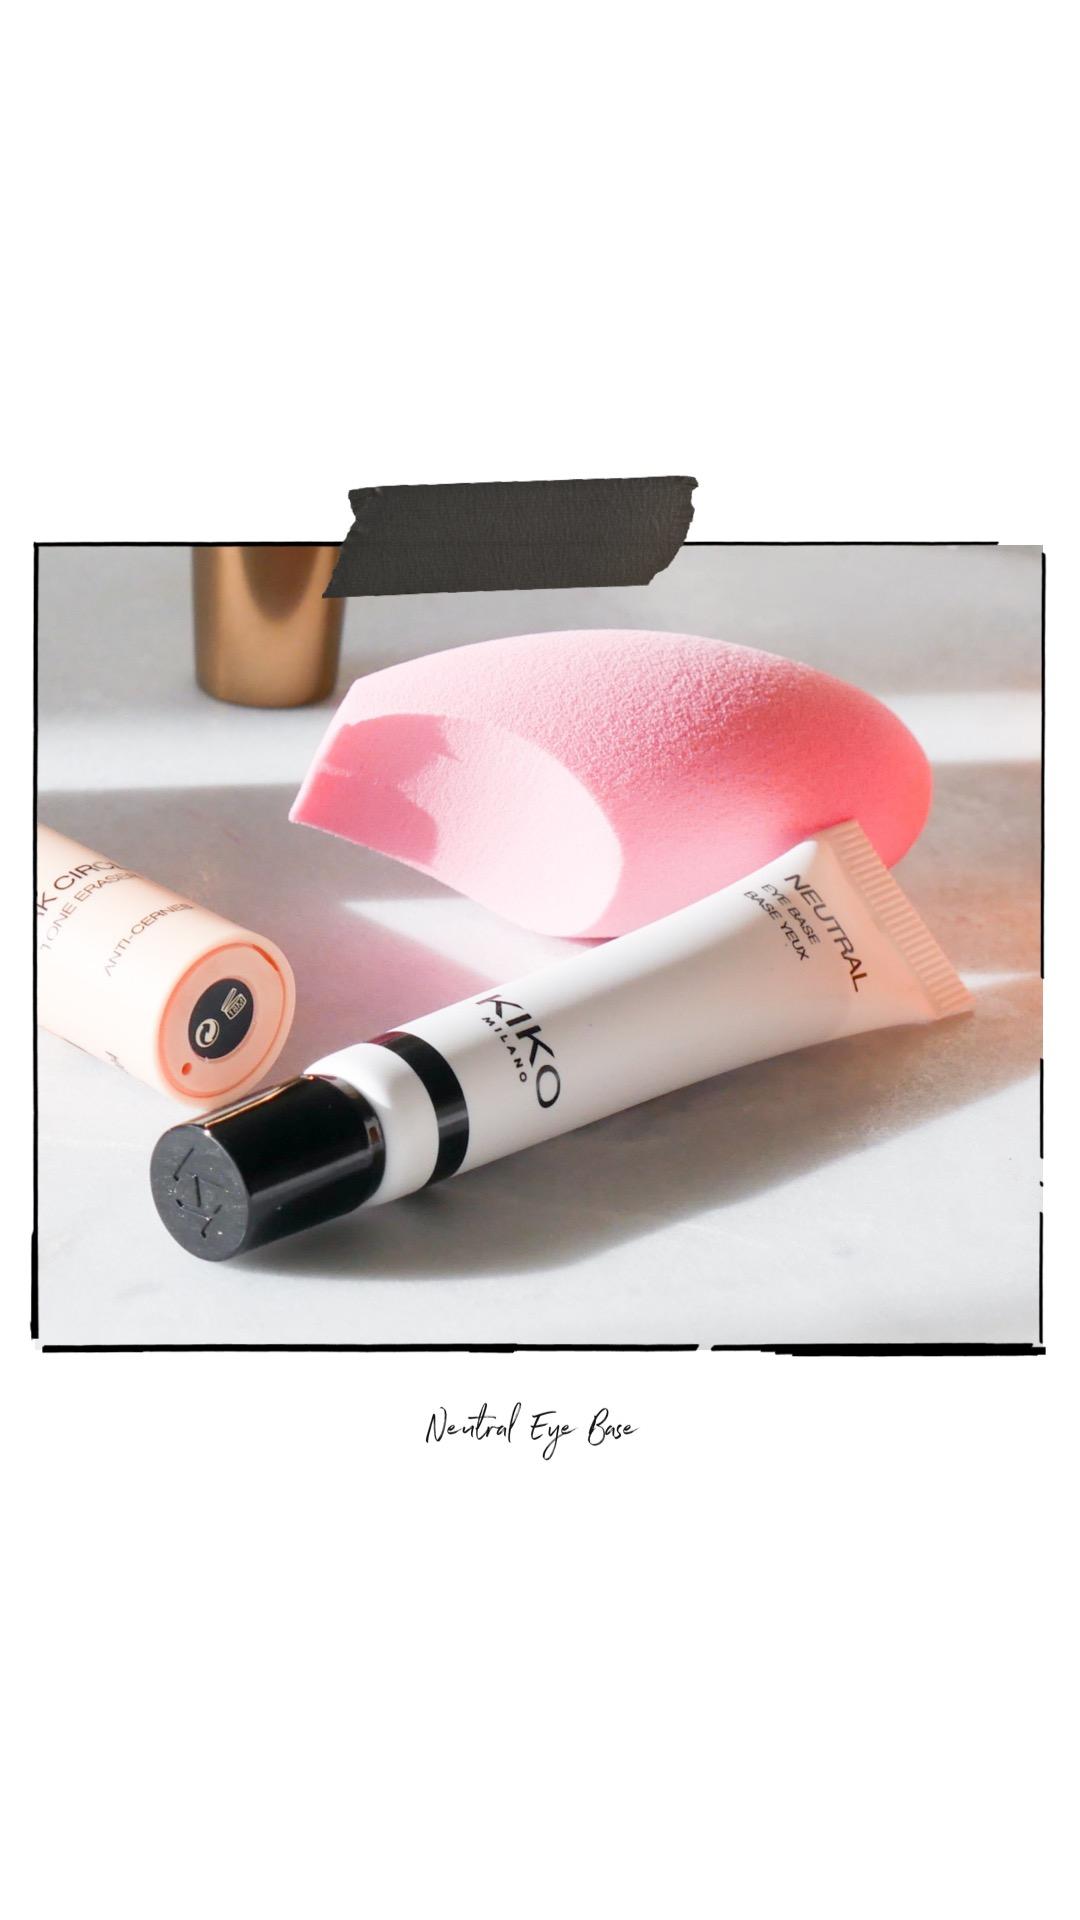 What I bought from KIKO Milano Online| My thoughts on everything I bought - all under £10, including this makeup sponge that I'm obsessed with! |If you're looking for cruelty free, affordable makeup and beauty, then you'll definitely be interested| www.kittyandb.com #KIKOTrendsetters #makeupsponge #beautyreviews #crueltyfreebeauty #beautyblog